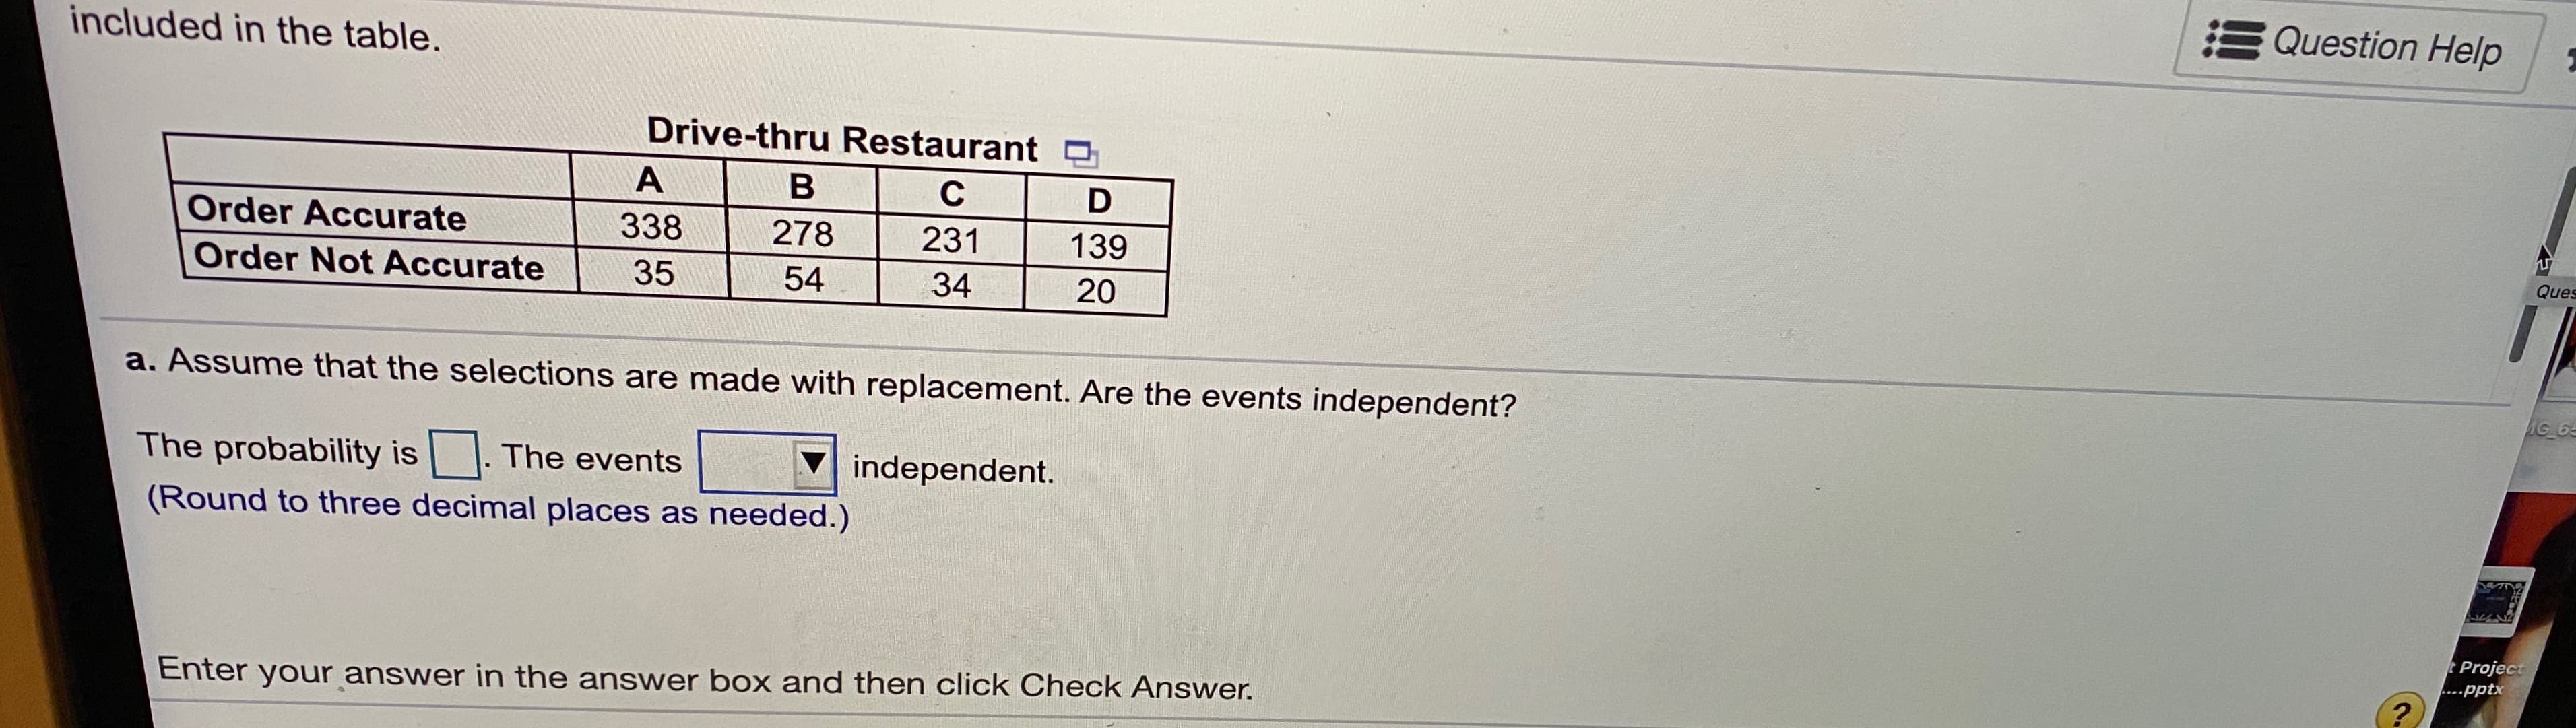 E Question Help
included in the table.
Drive-thru Restaurant O
в
Order Accurate
338
278
231
139
Ques
Order Not Accurate
35
54
34
20
a. Assume that the selections are made with replacement. Are the events independent?
AG 6
The probability is
The events
independent.
(Round to three decimal places as needed.)
tProject
....pptx
Enter your answer in the answer box and then click Check Answer.
